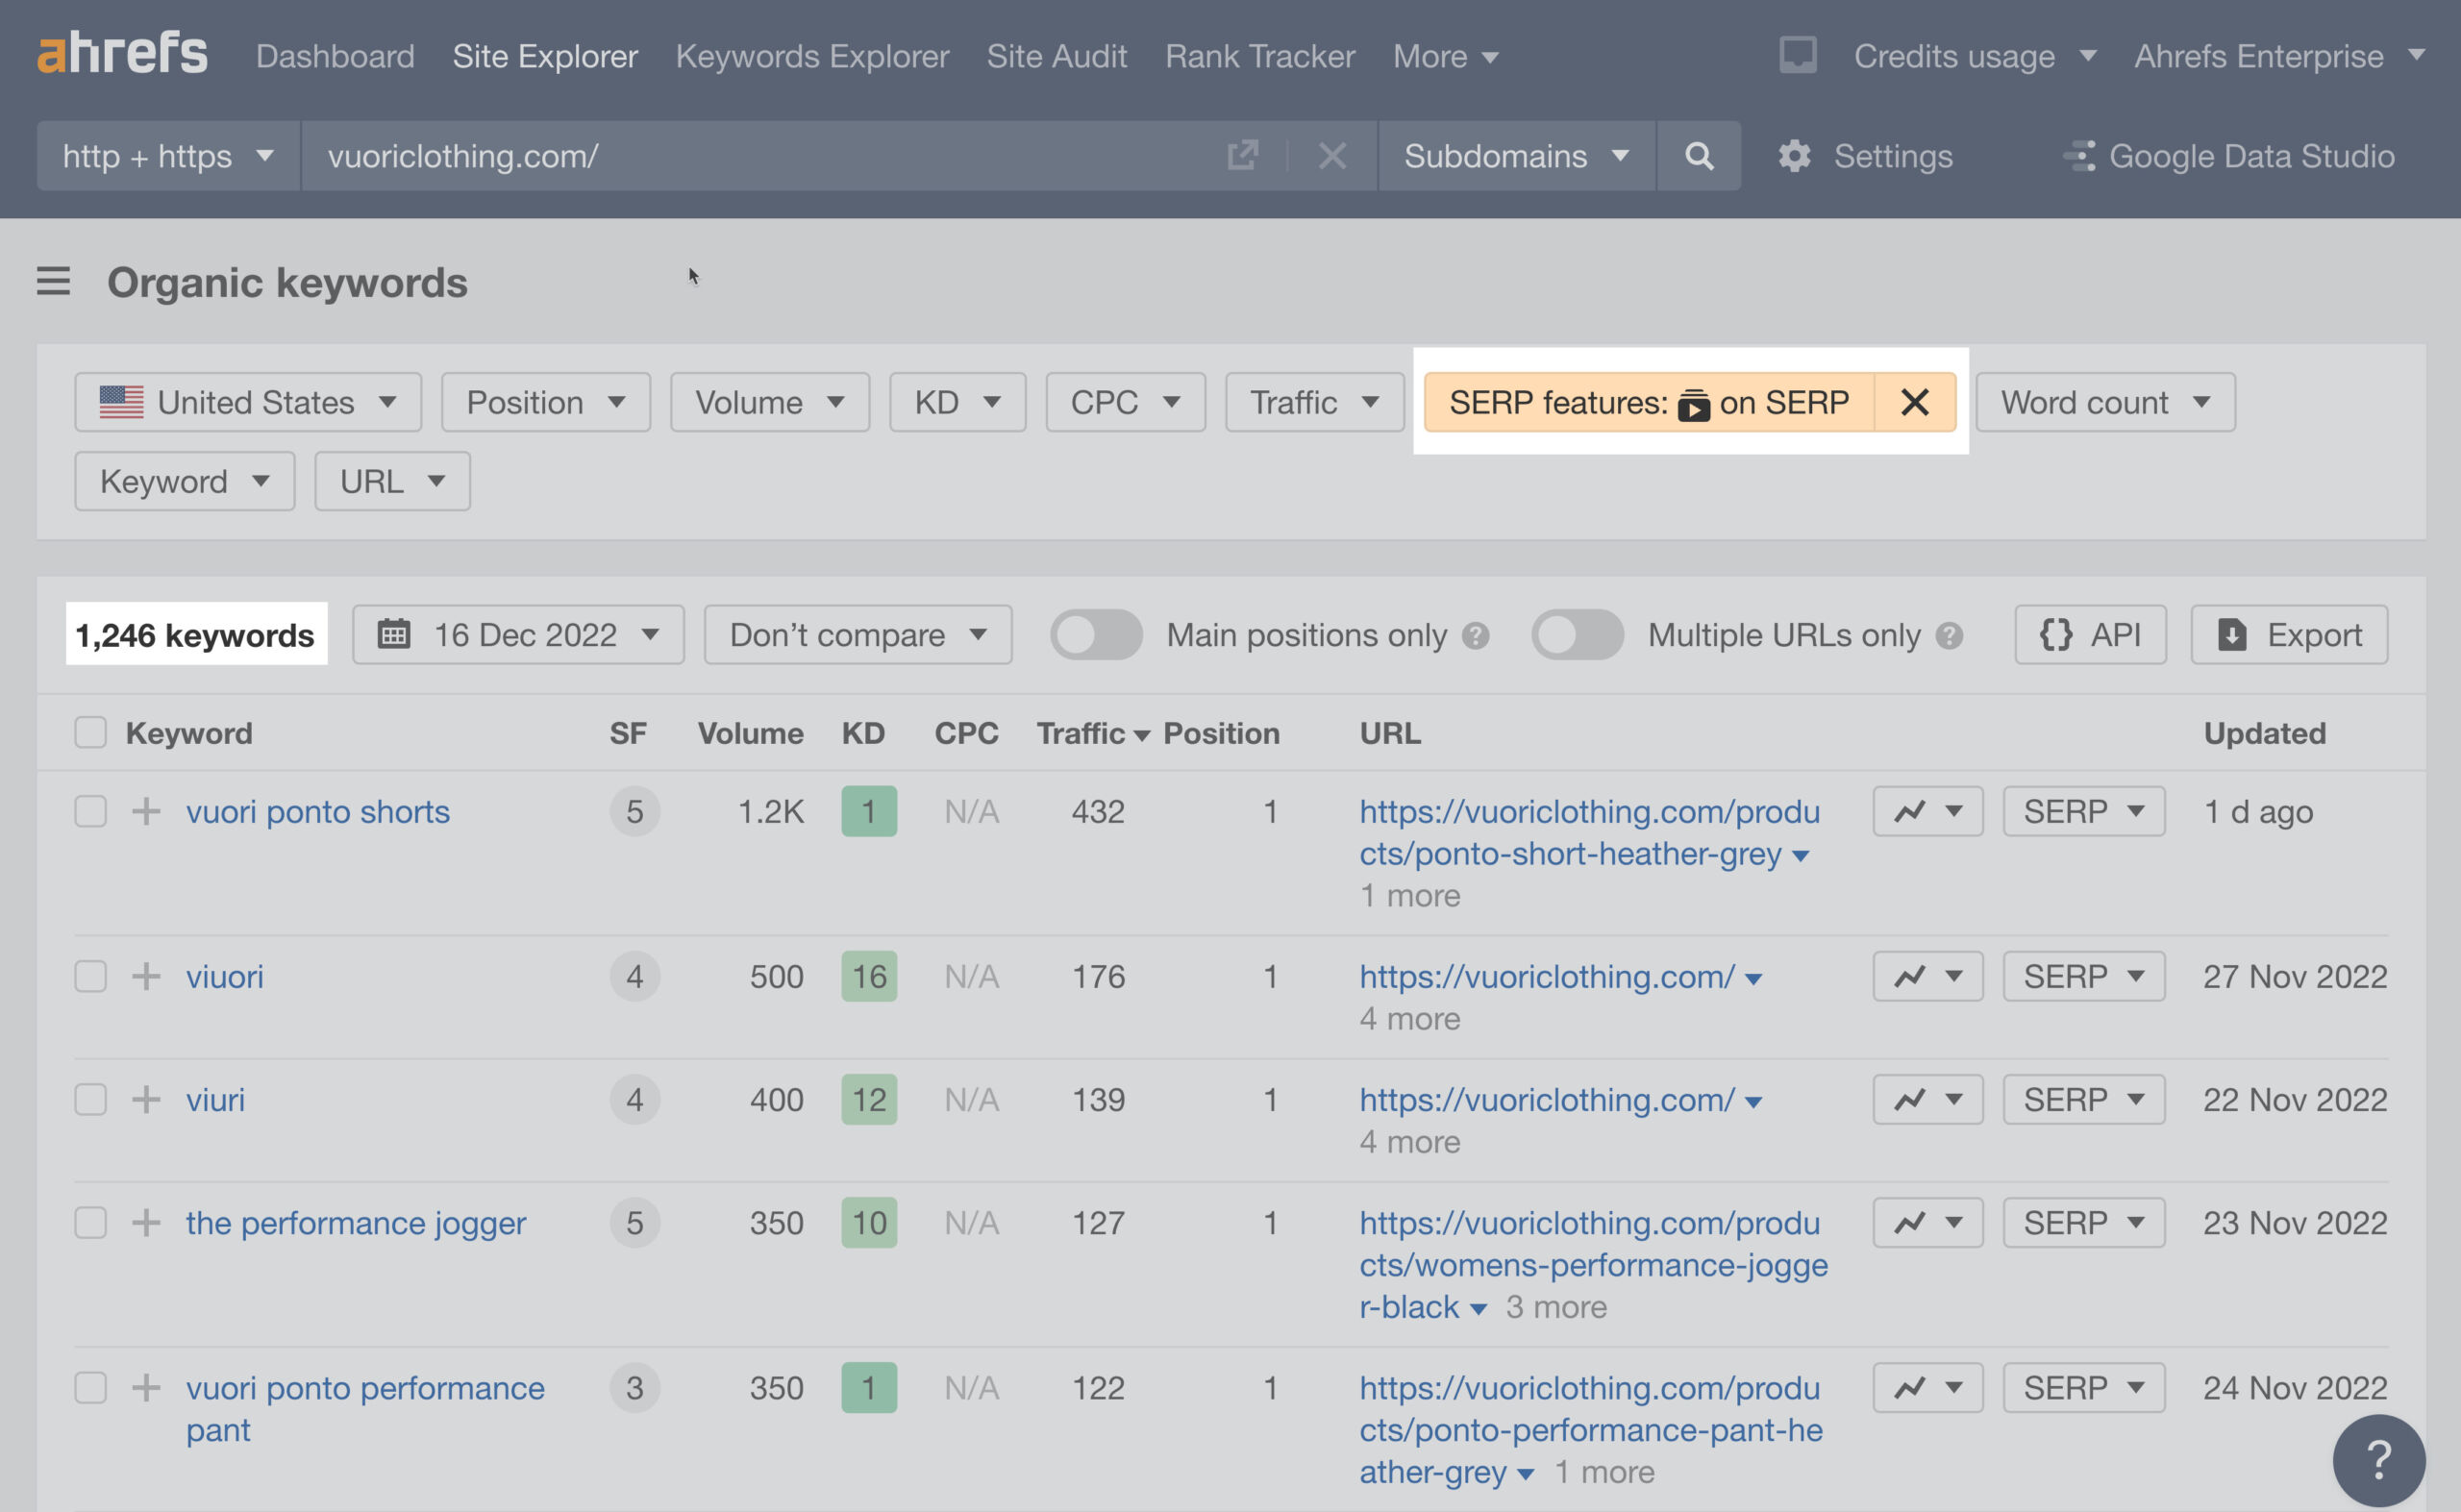 Filtering for organic keywords that trigger video results in Ahrefs' Site Explorer